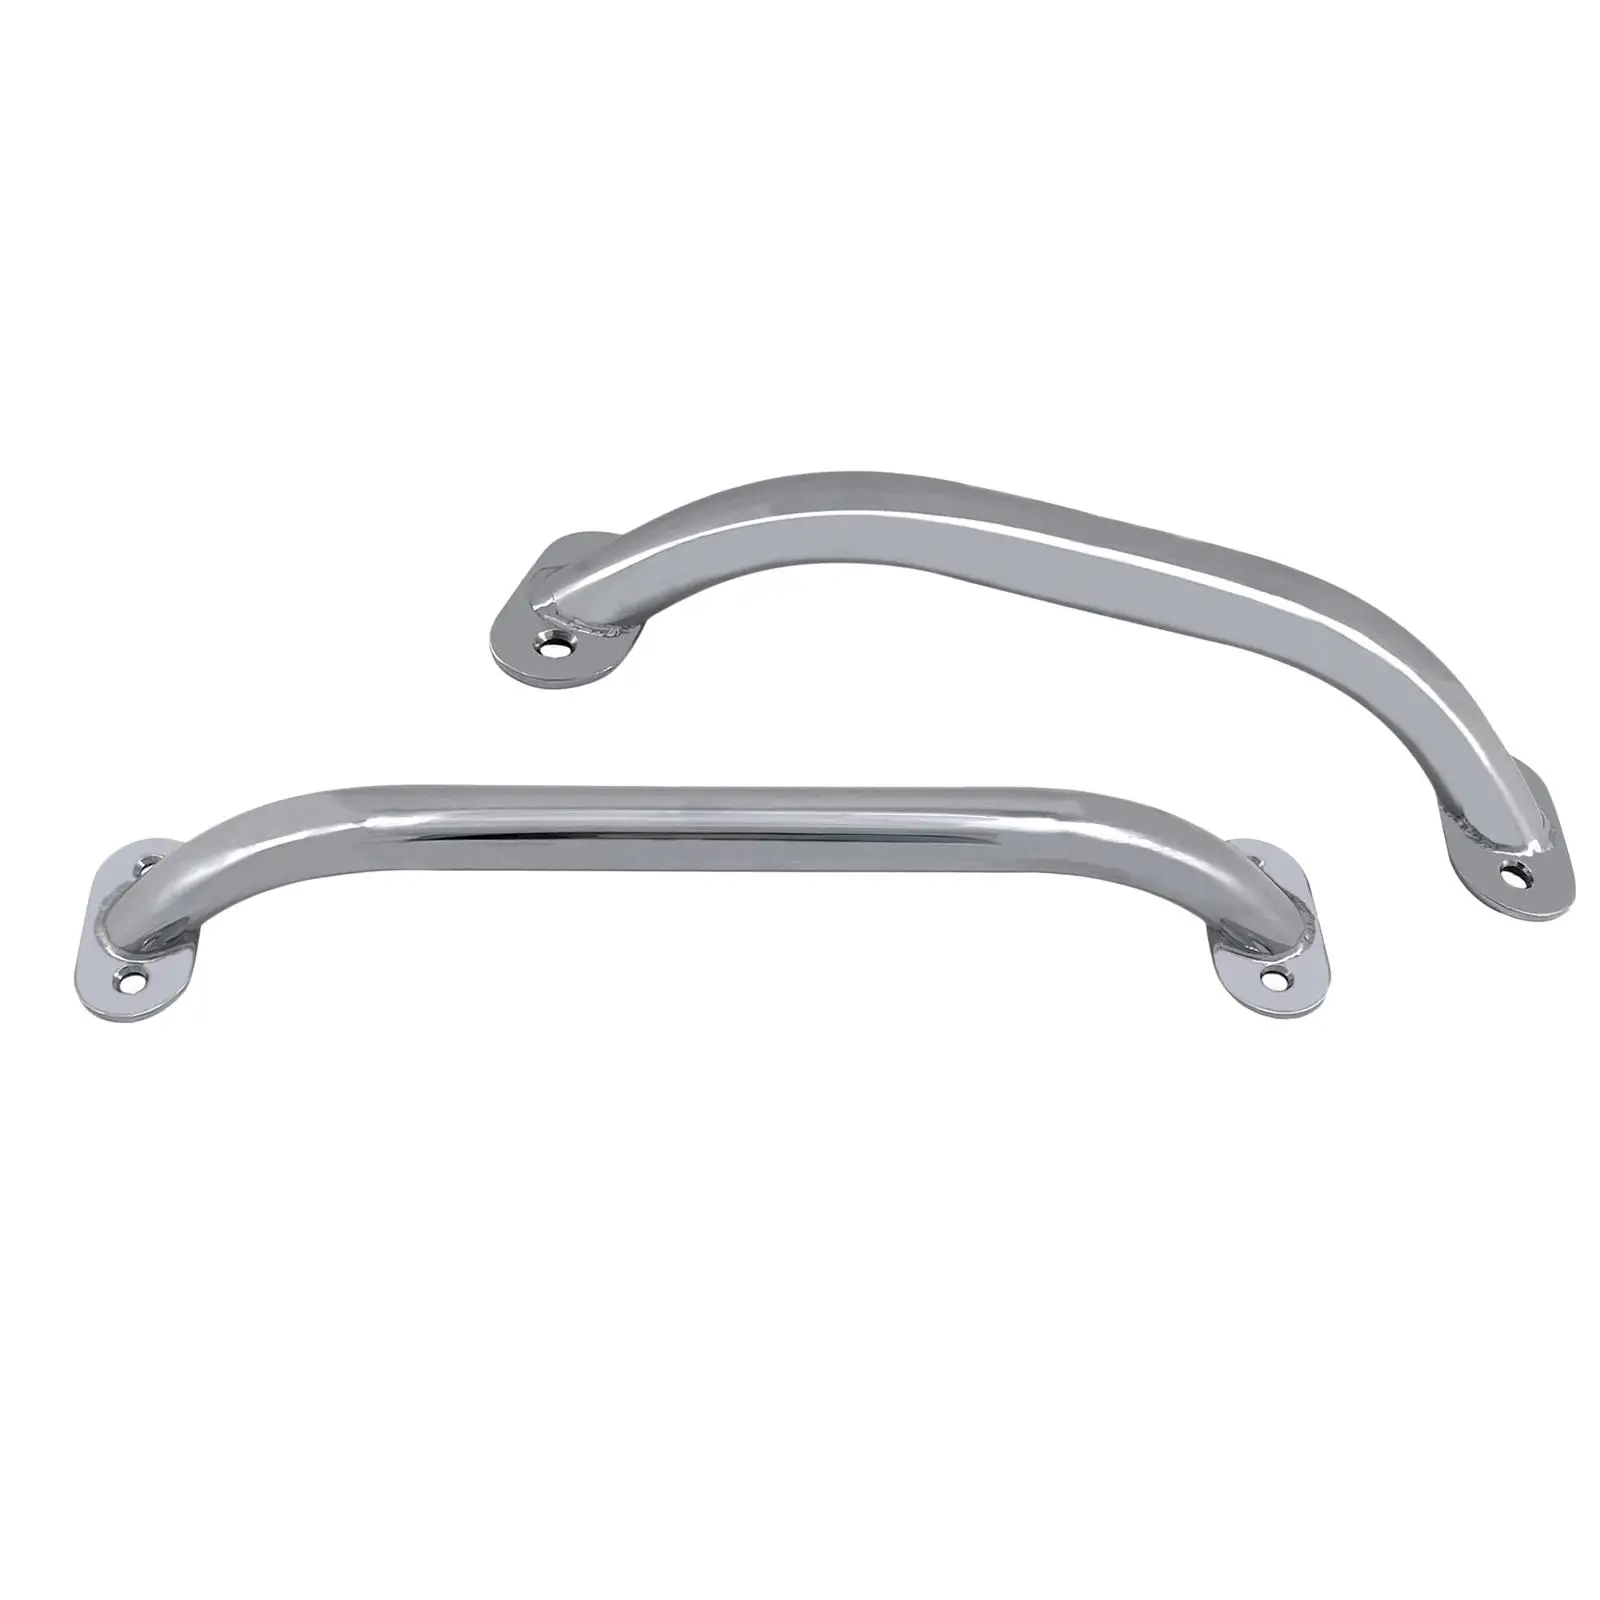 Stainless Steel Boat Grab Handle Marine Handrail for Boat Accessories Advanced manufacturing technology,